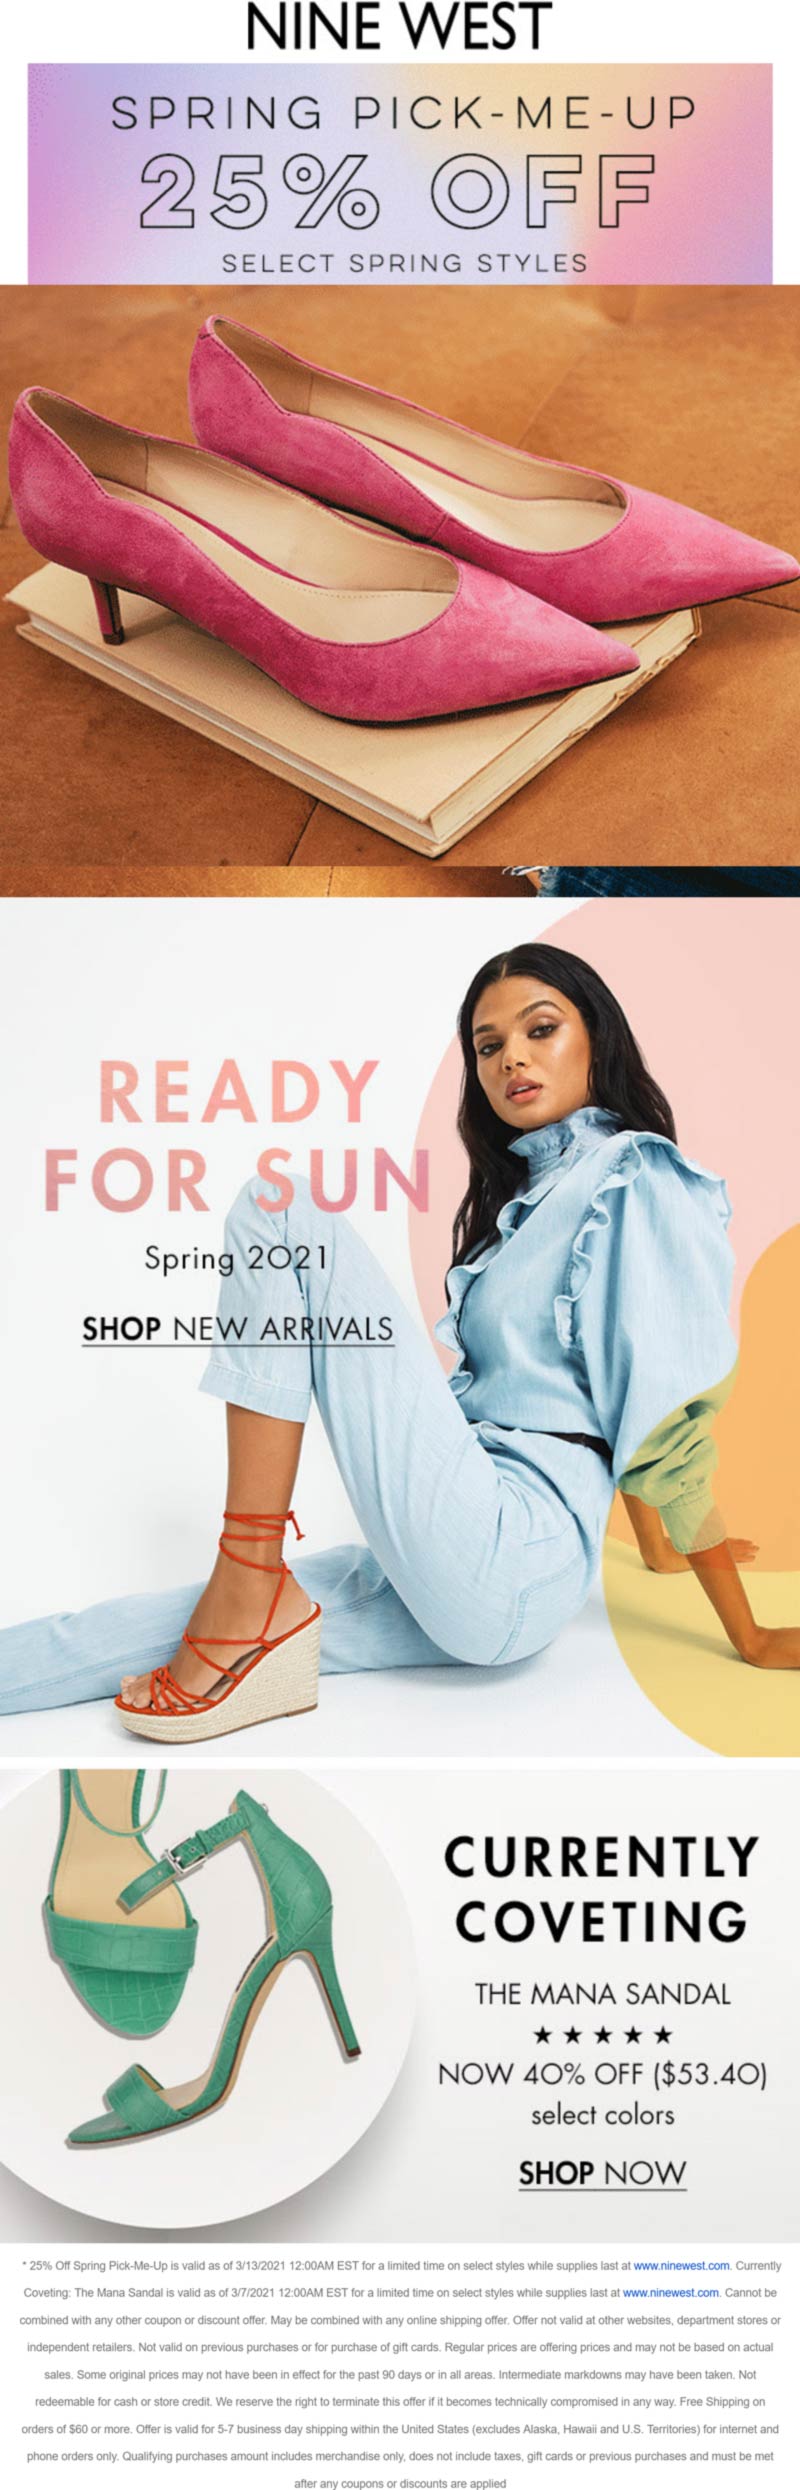 Nine West stores Coupon  25% off Spring styles online at Nine West #ninewest 